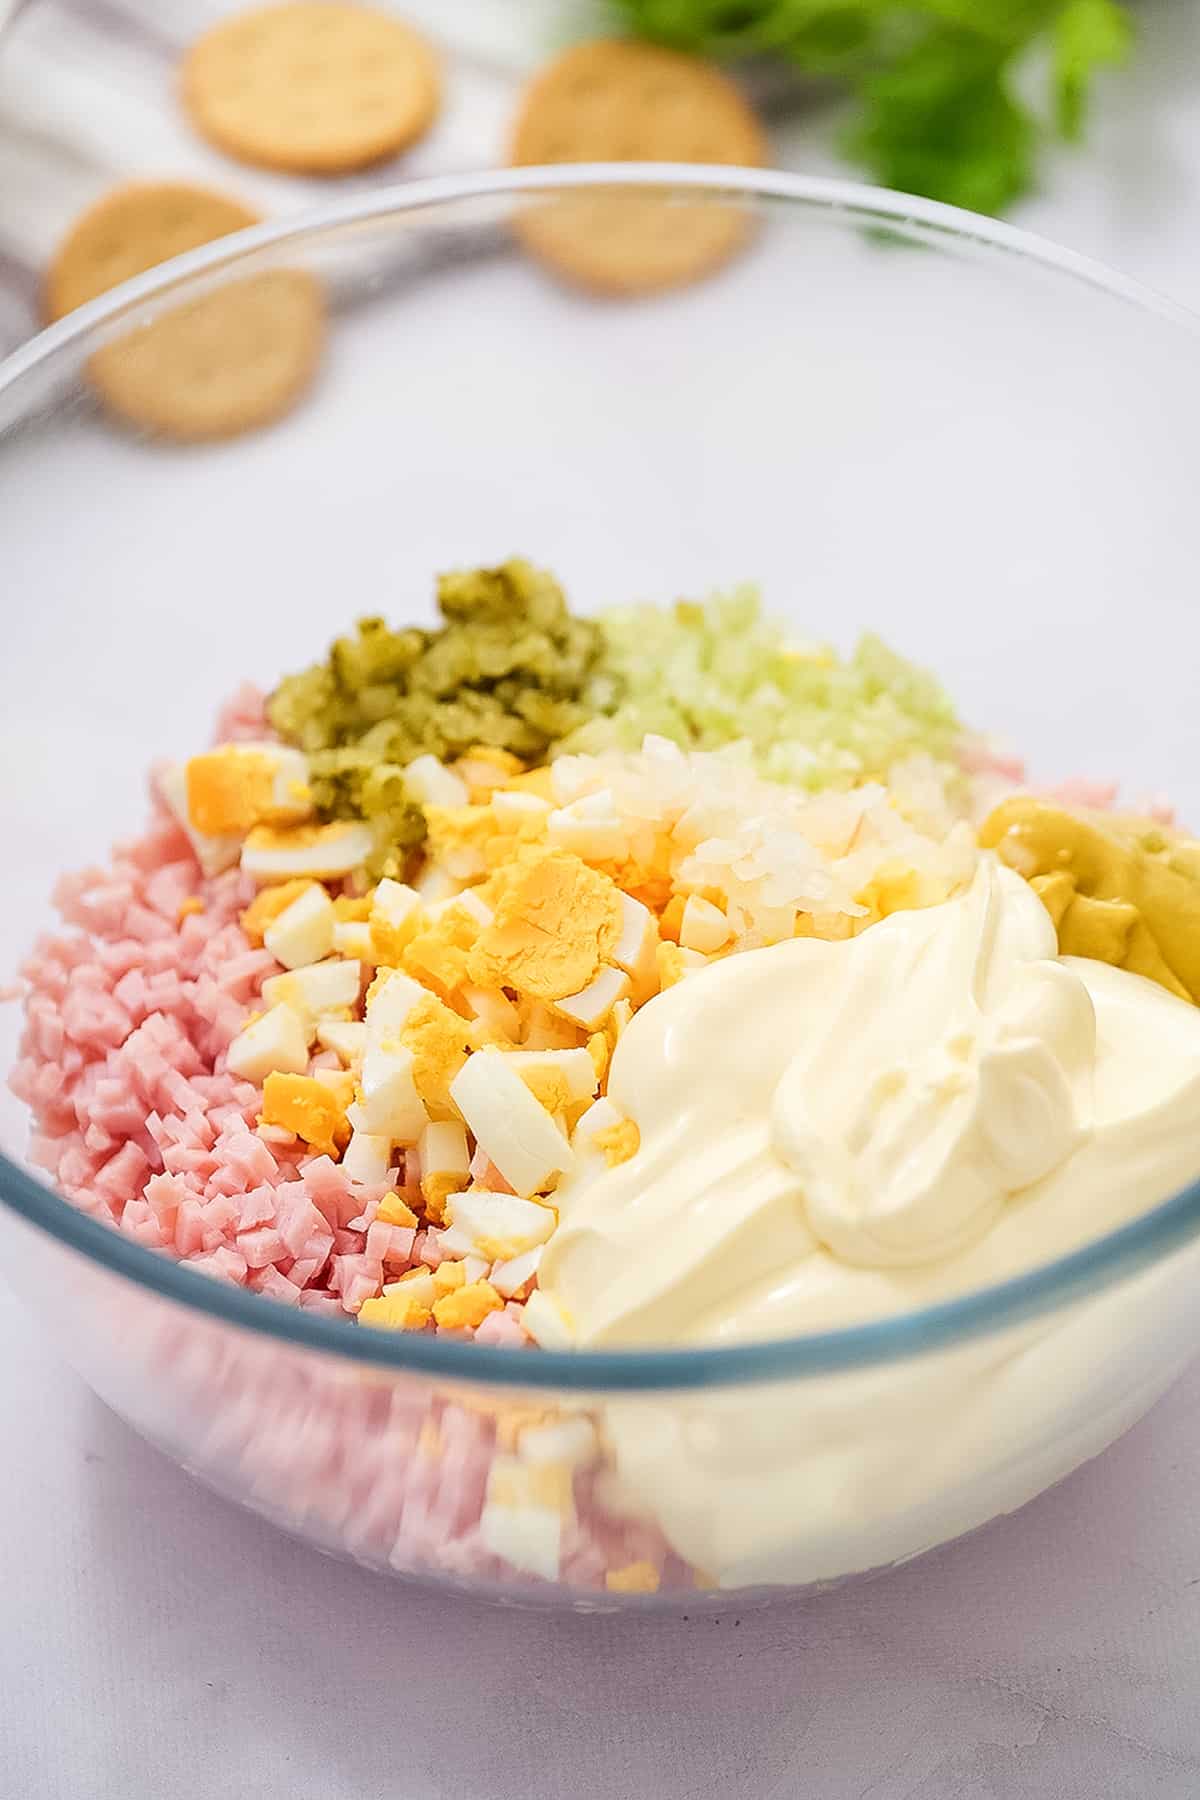 Bowl of diced ham, hard boiled eggs, celery, mayonnaise before mixing